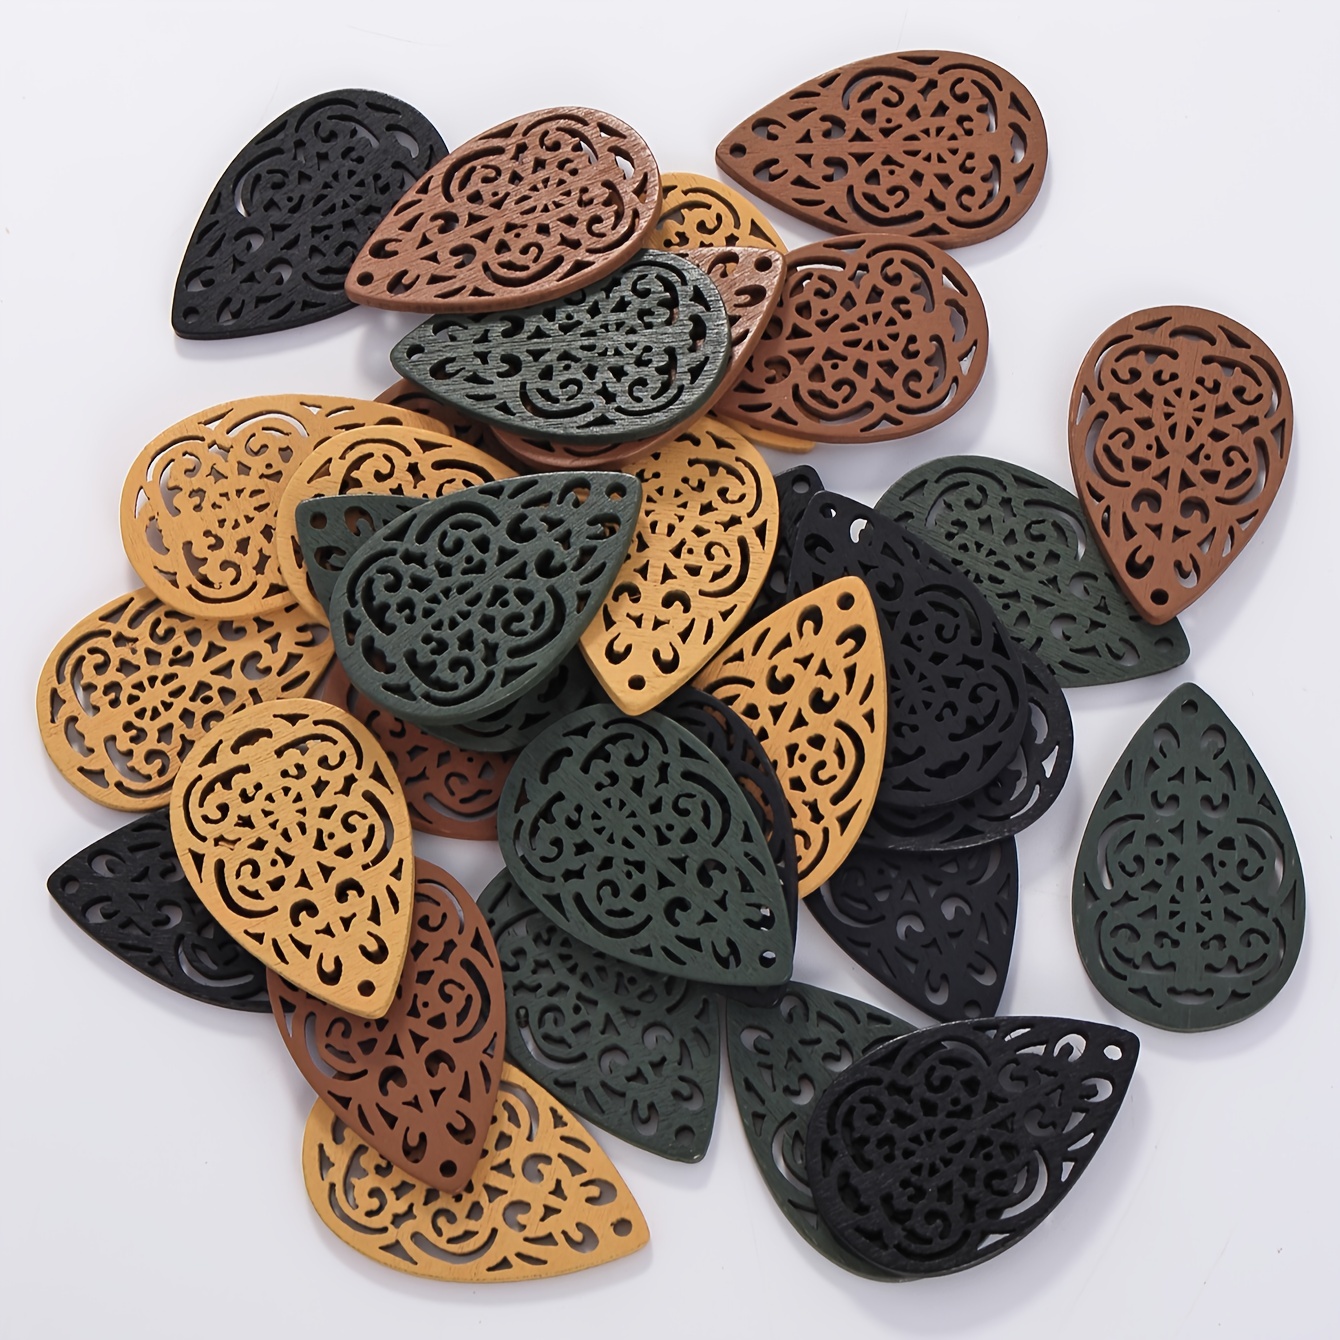 

32 Pcs Mixed Color Hollow-out Carved Wood Chips, Diy Accessories, For Earrings Necklace Decoration